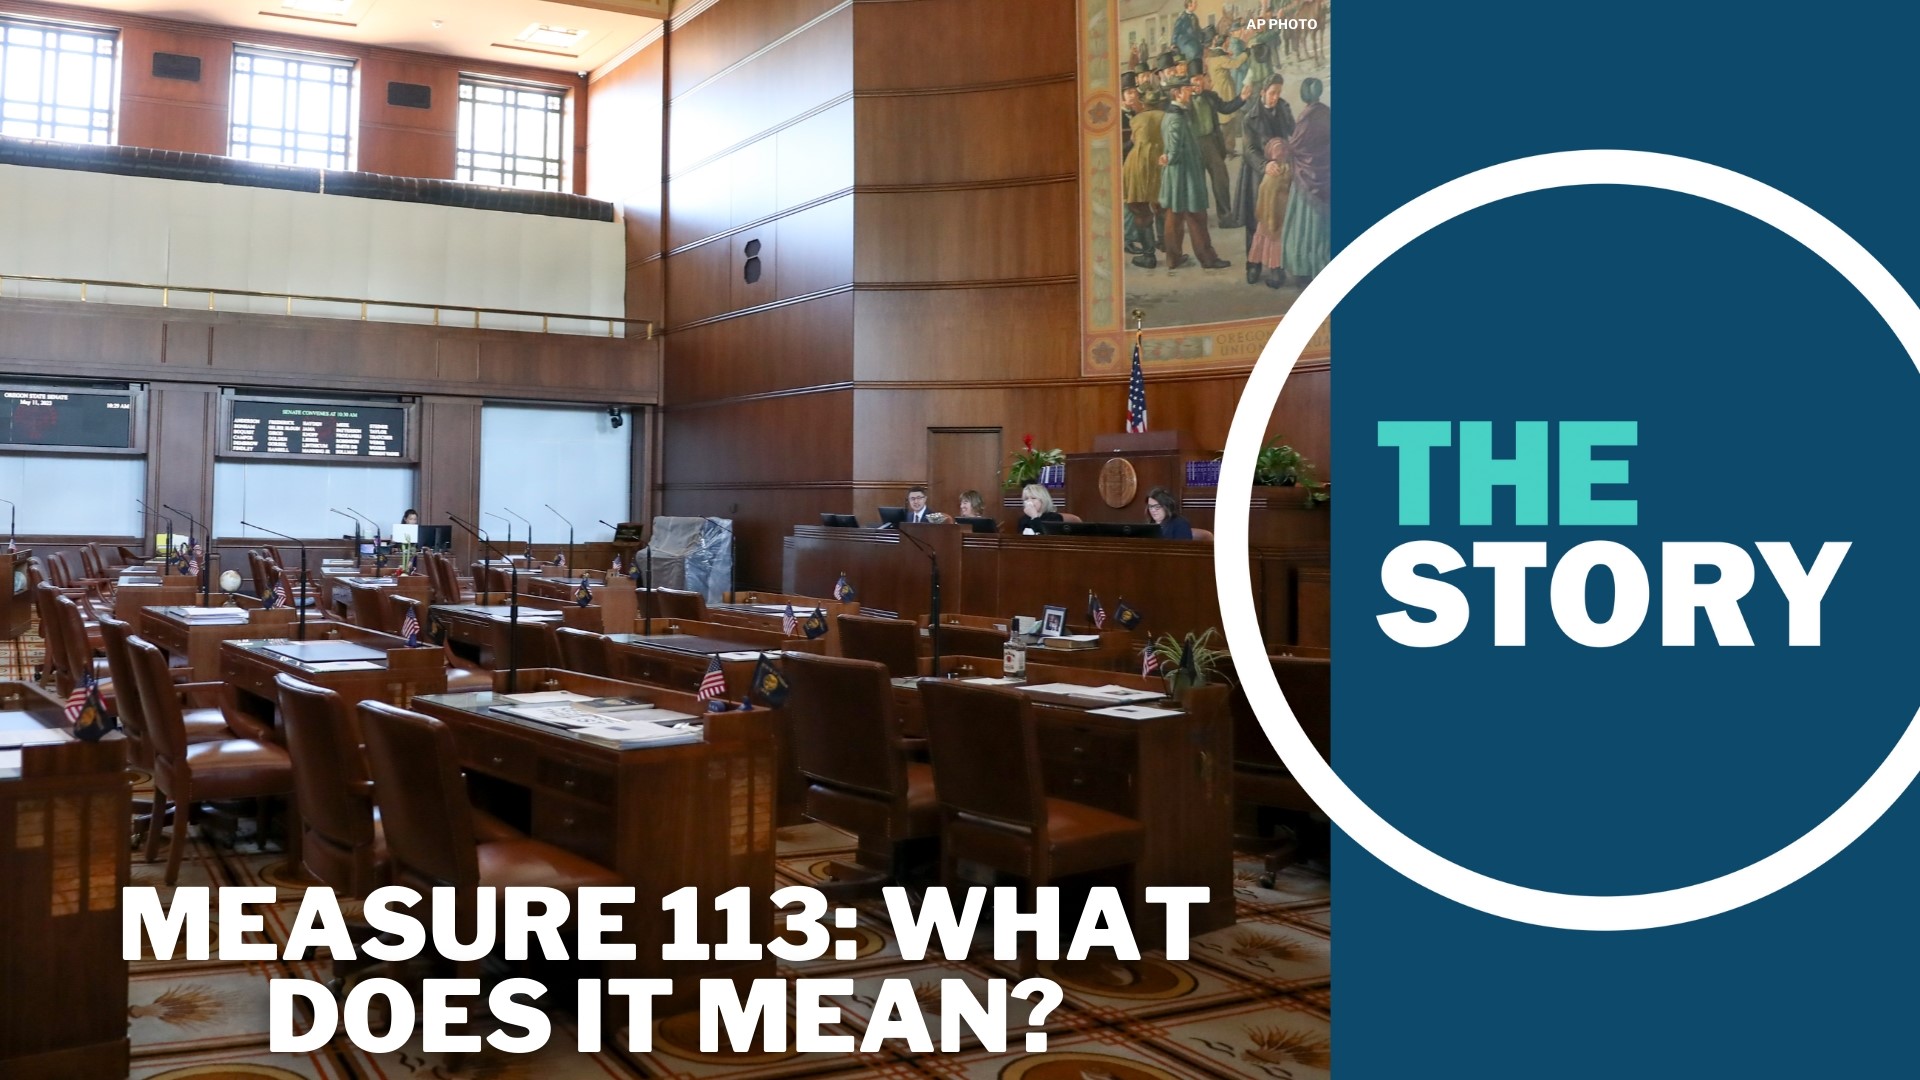 Portland lawyer John DiLorenzo has taken on the case, arguing that Measure 113's wording does not align with the Oregon Secretary of State's interpretation.